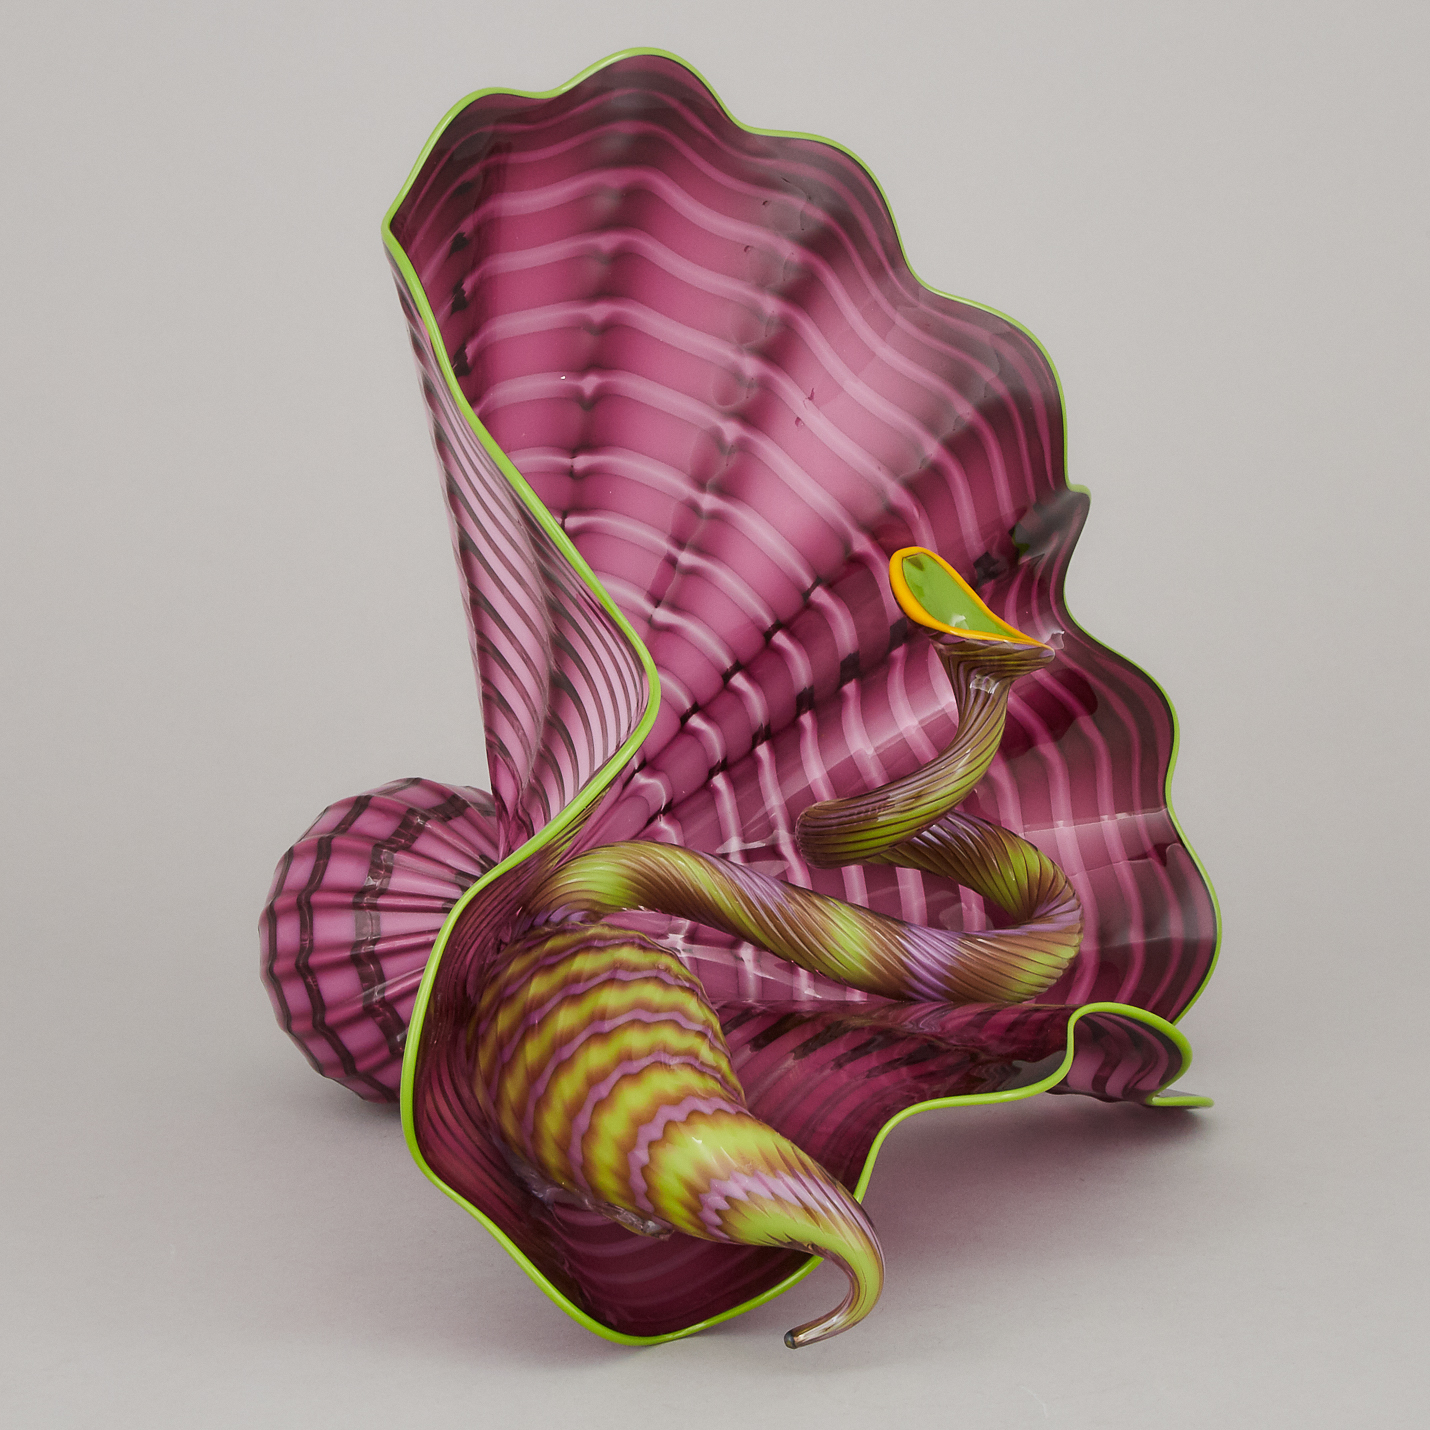 Dale Chihuly (American, b.1941), Amethyst Persian Glass Group with Green and Yellow Lip Wraps, 2005